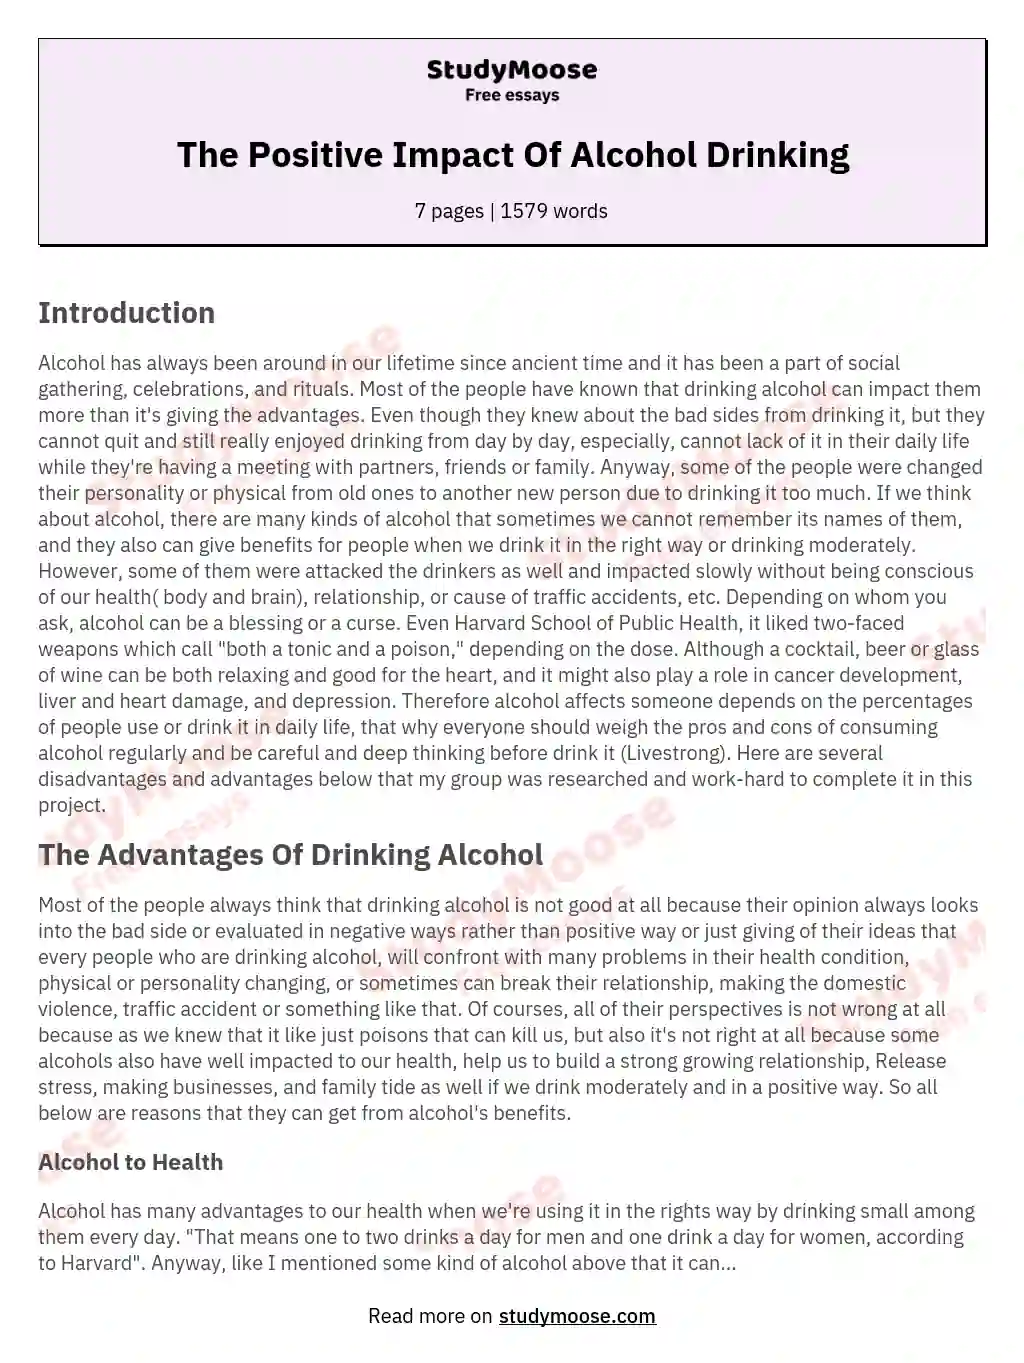 The Positive Impact Of Alcohol Drinking essay